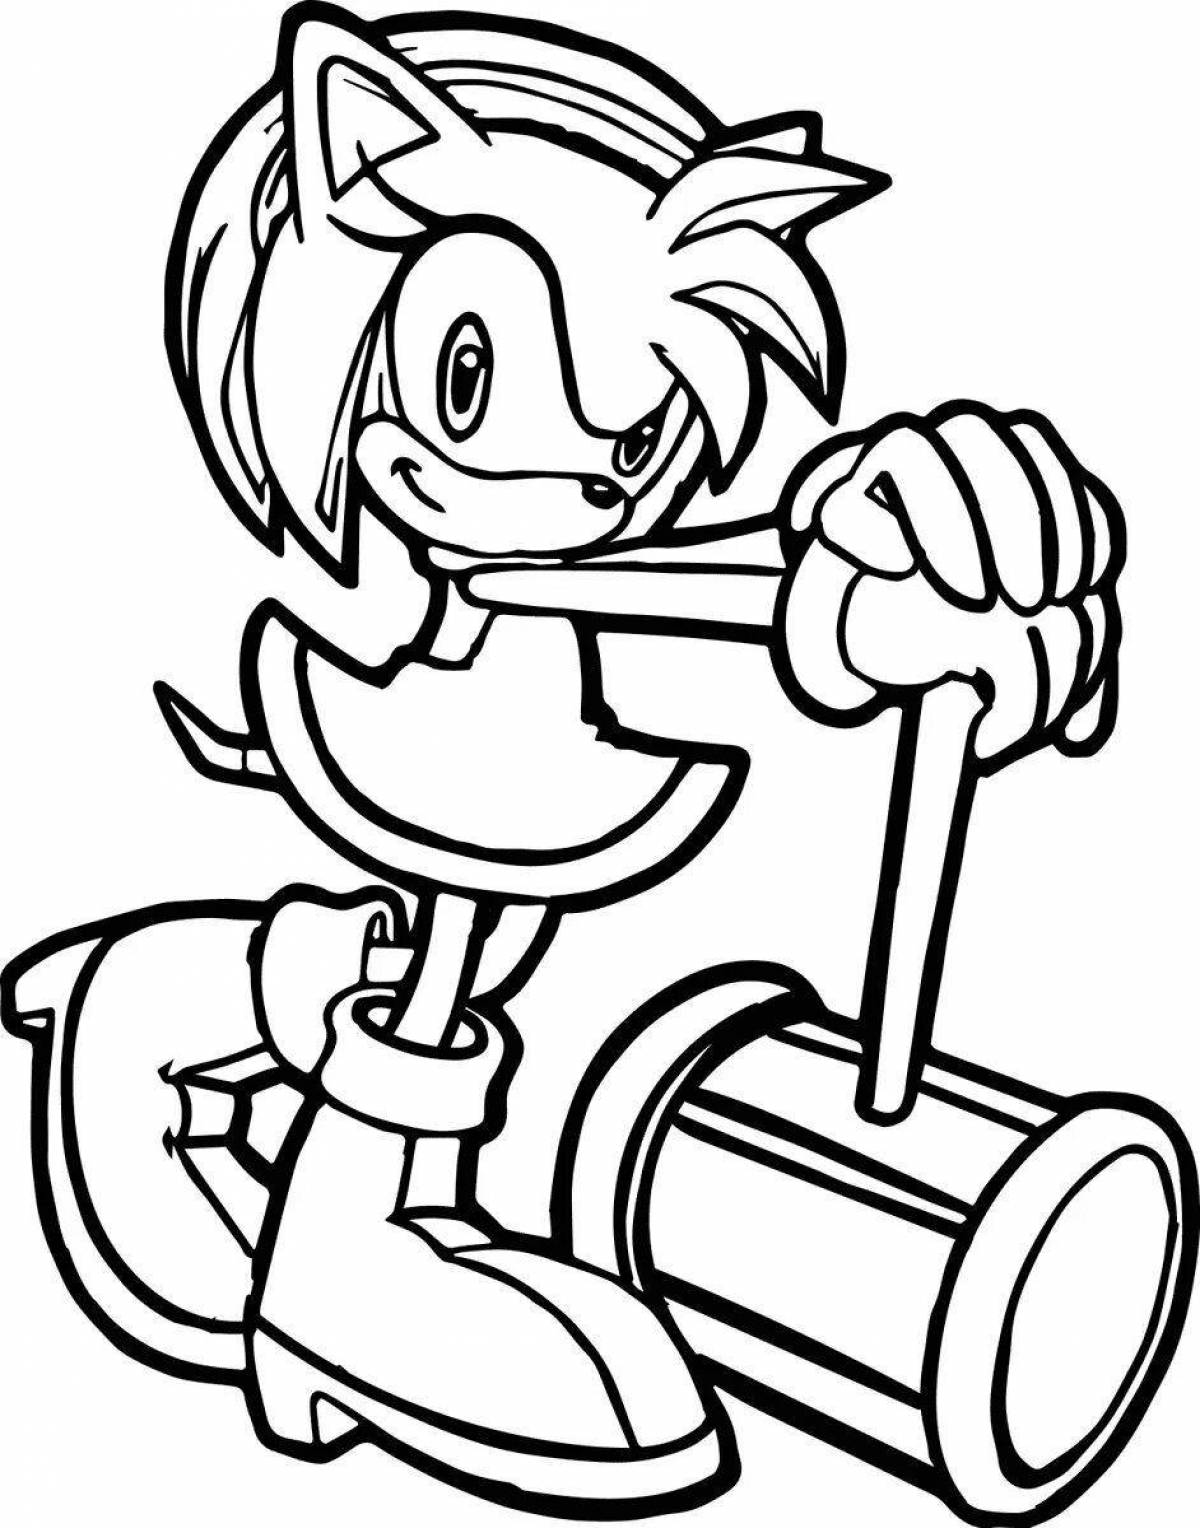 Sonic amy live coloring